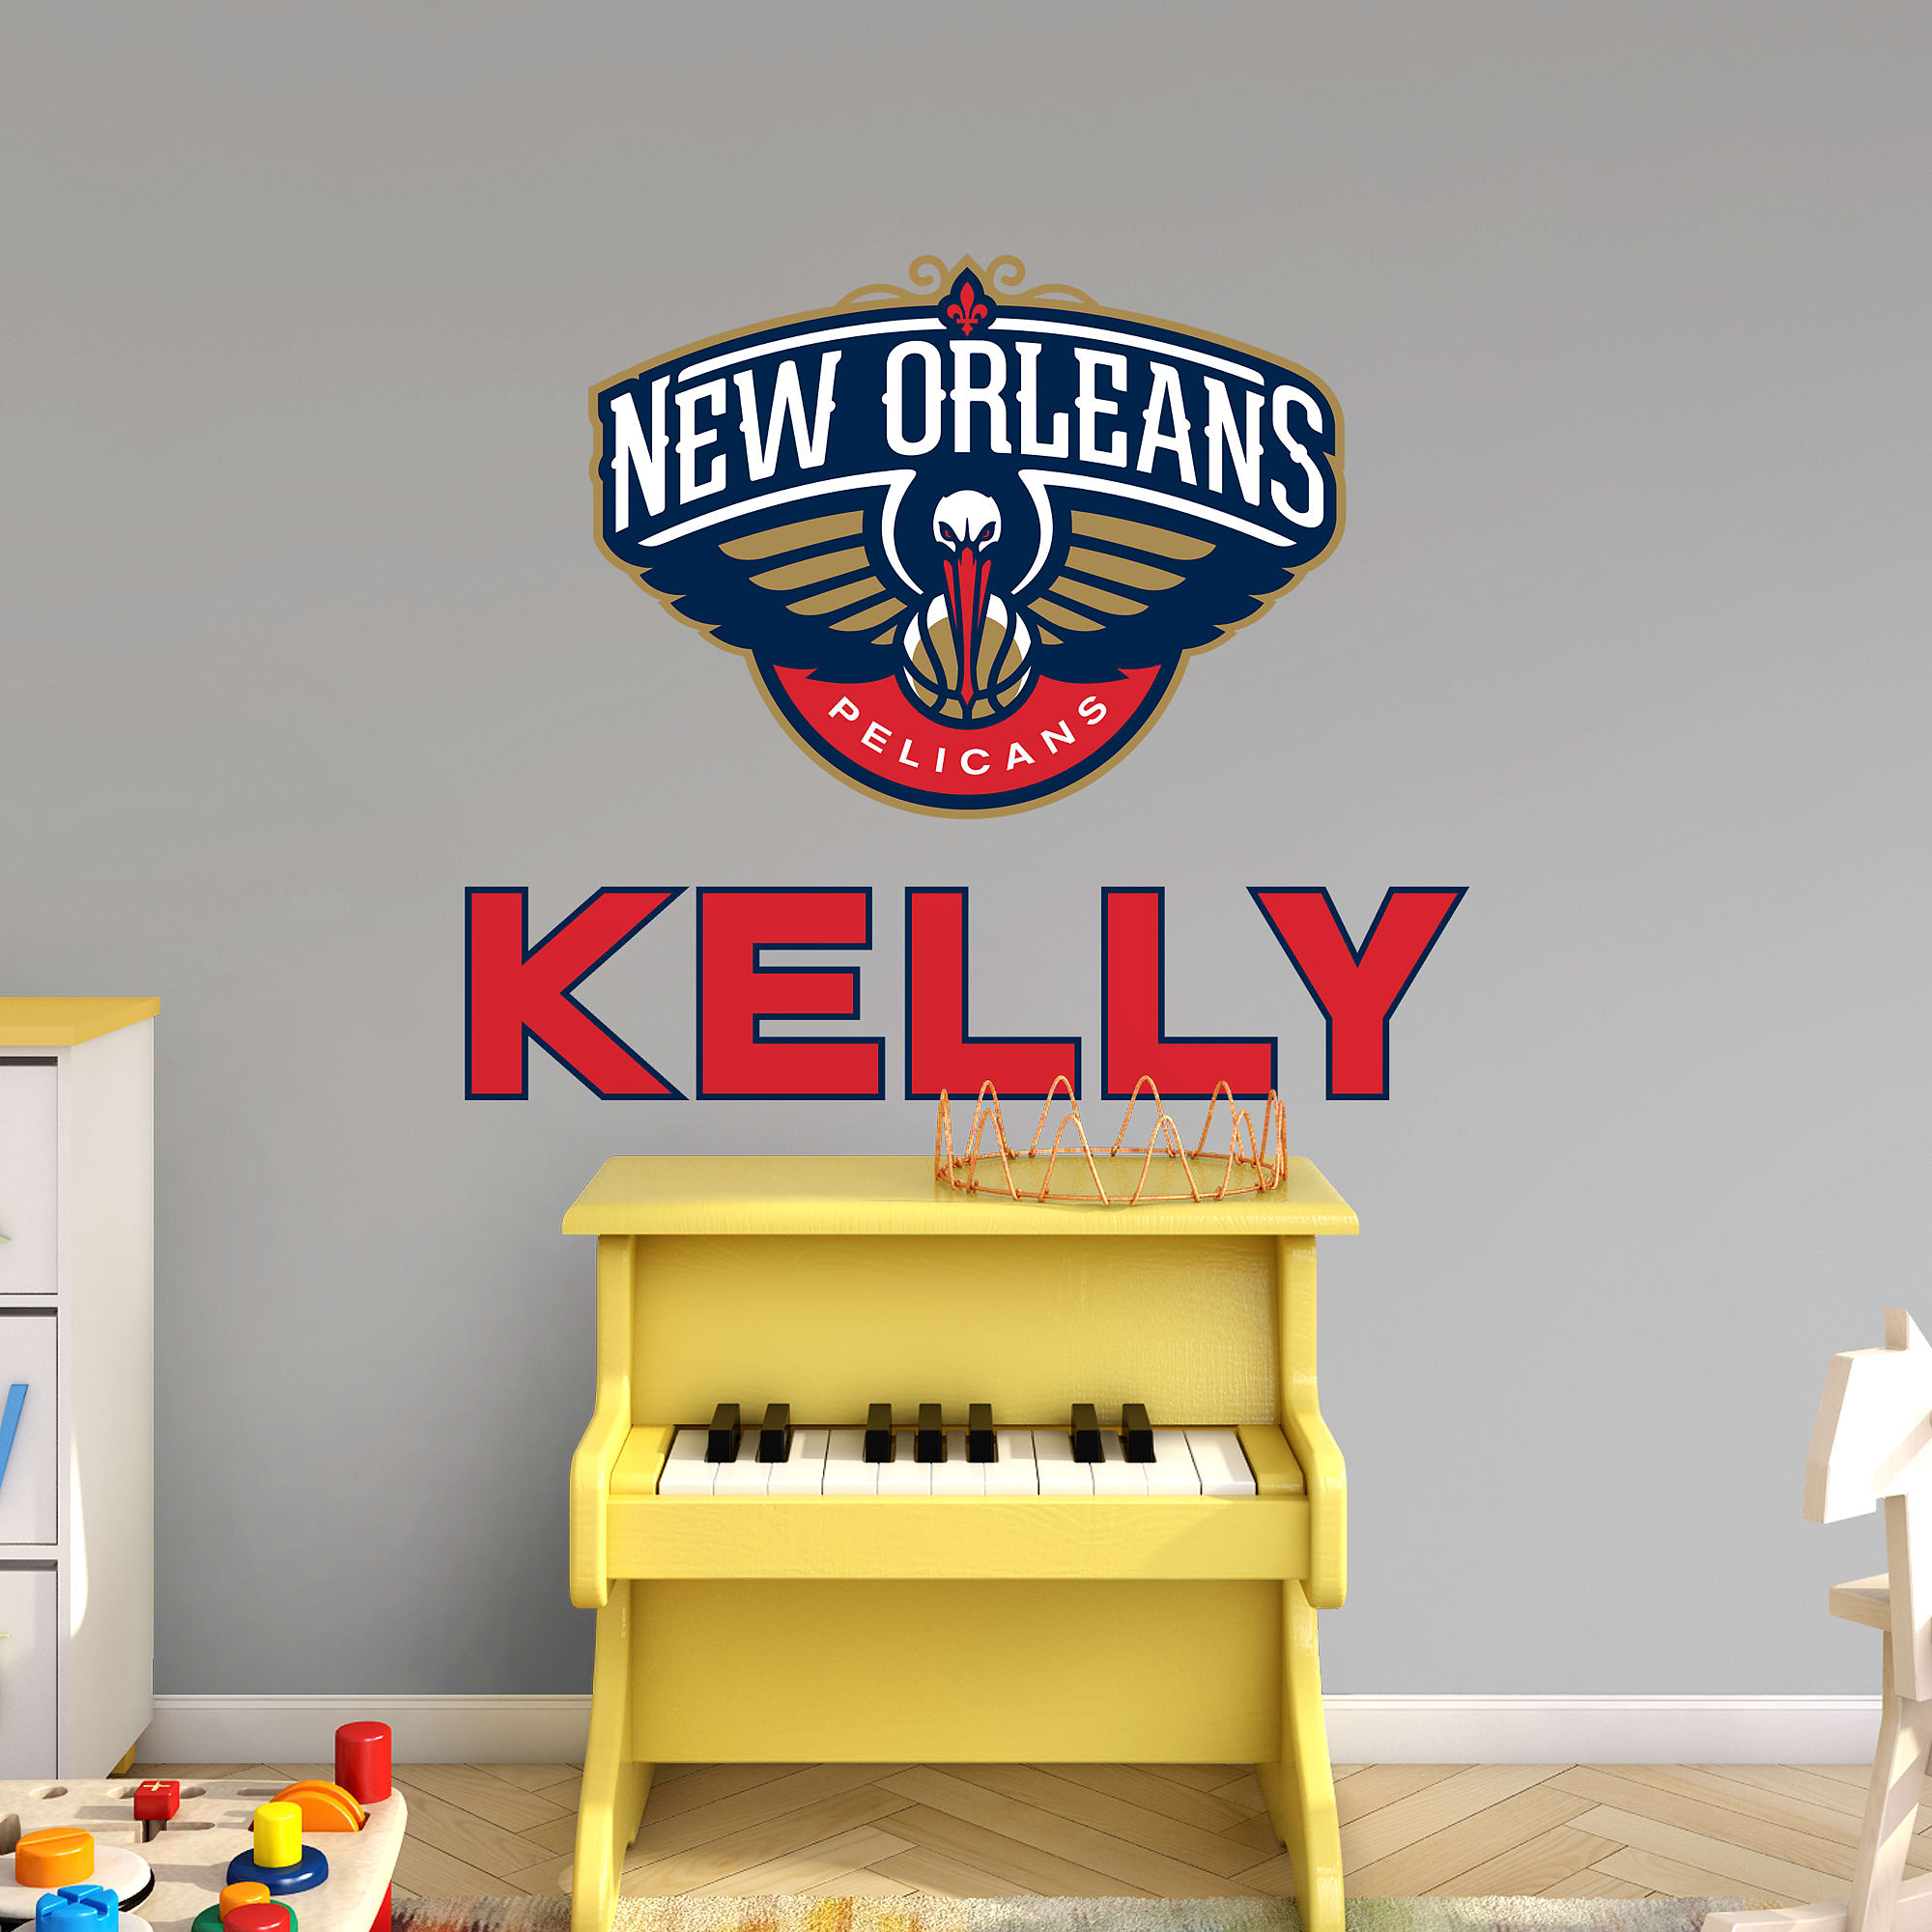 New Orleans Pelicans: Stacked Personalized Name - Officially Licensed NBA Transfer Decal in Red (52"W x 39.5"H) by Fathead | Vin